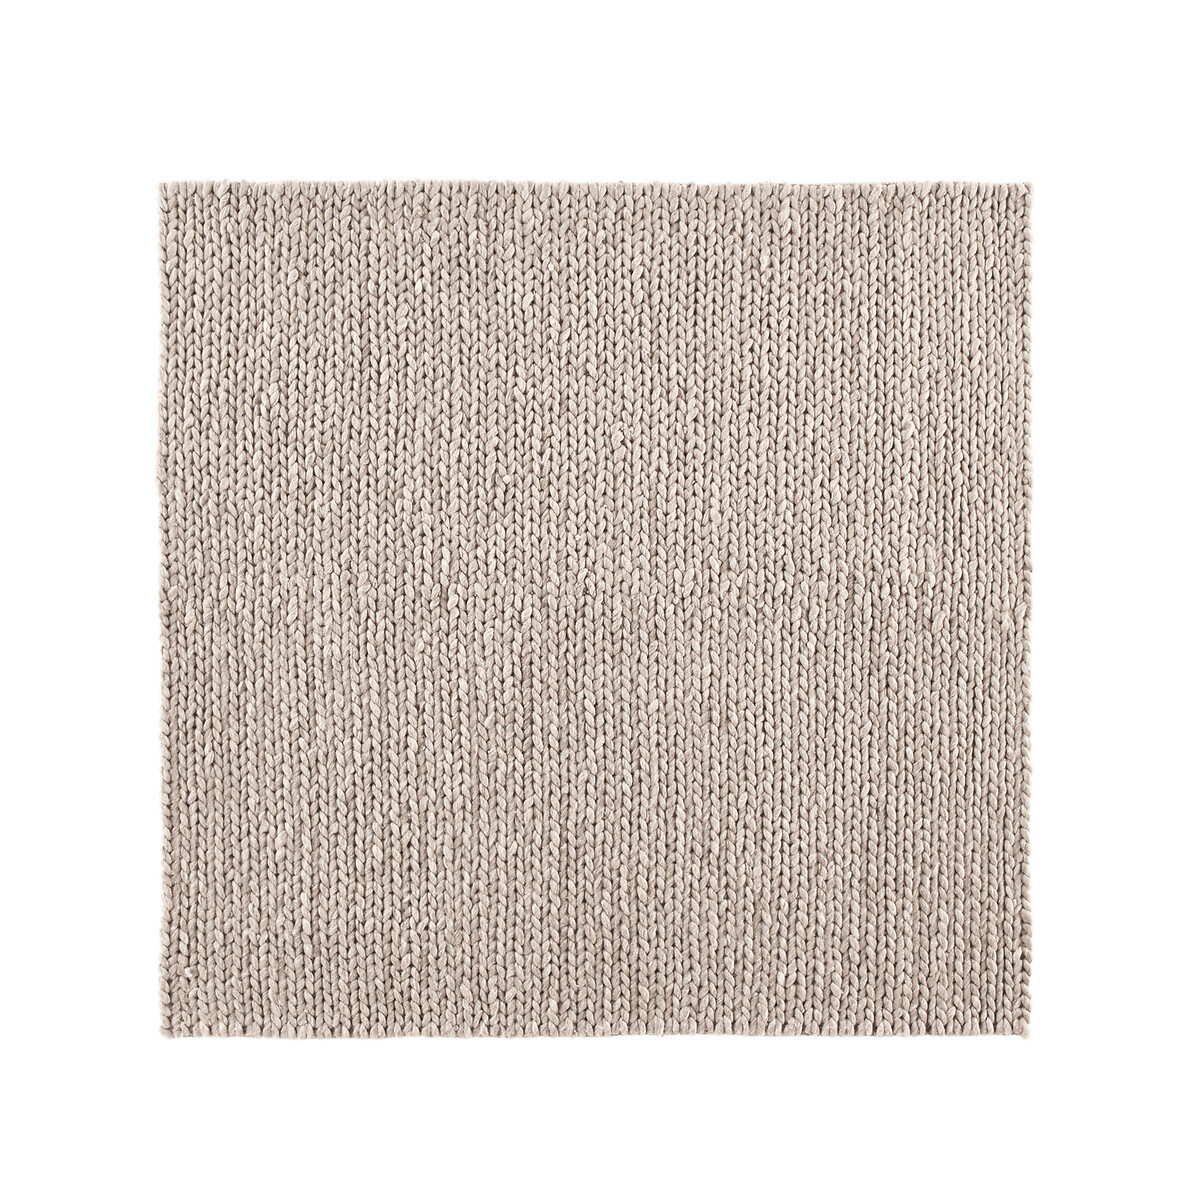 Tapis pure laine effet tricot forme carrée, Diano